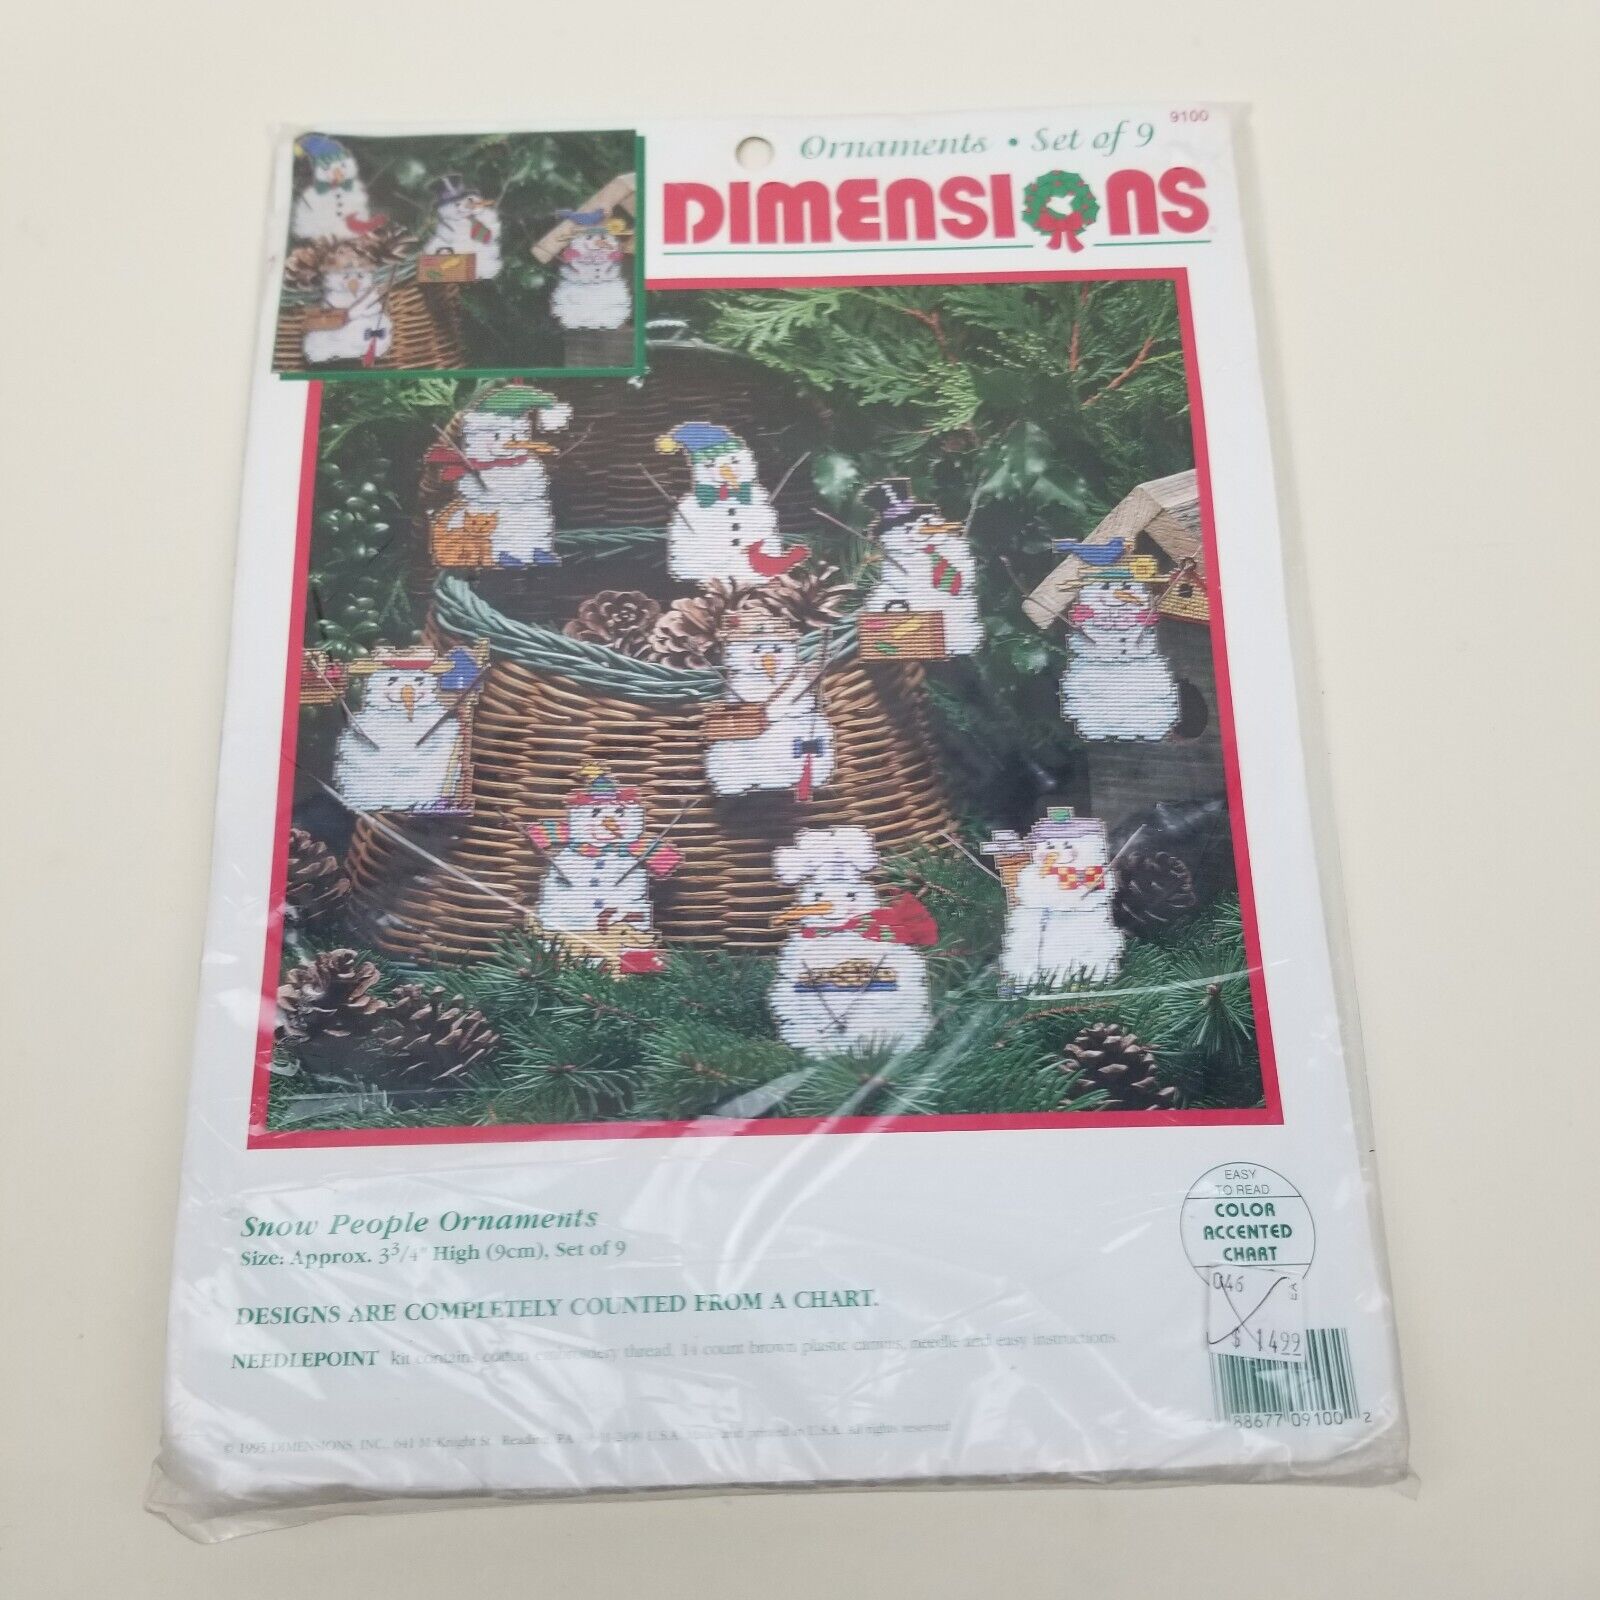 Snow People Ornaments Plastic Canvas Counted Cross Stitch Kit - Dimensions #9100